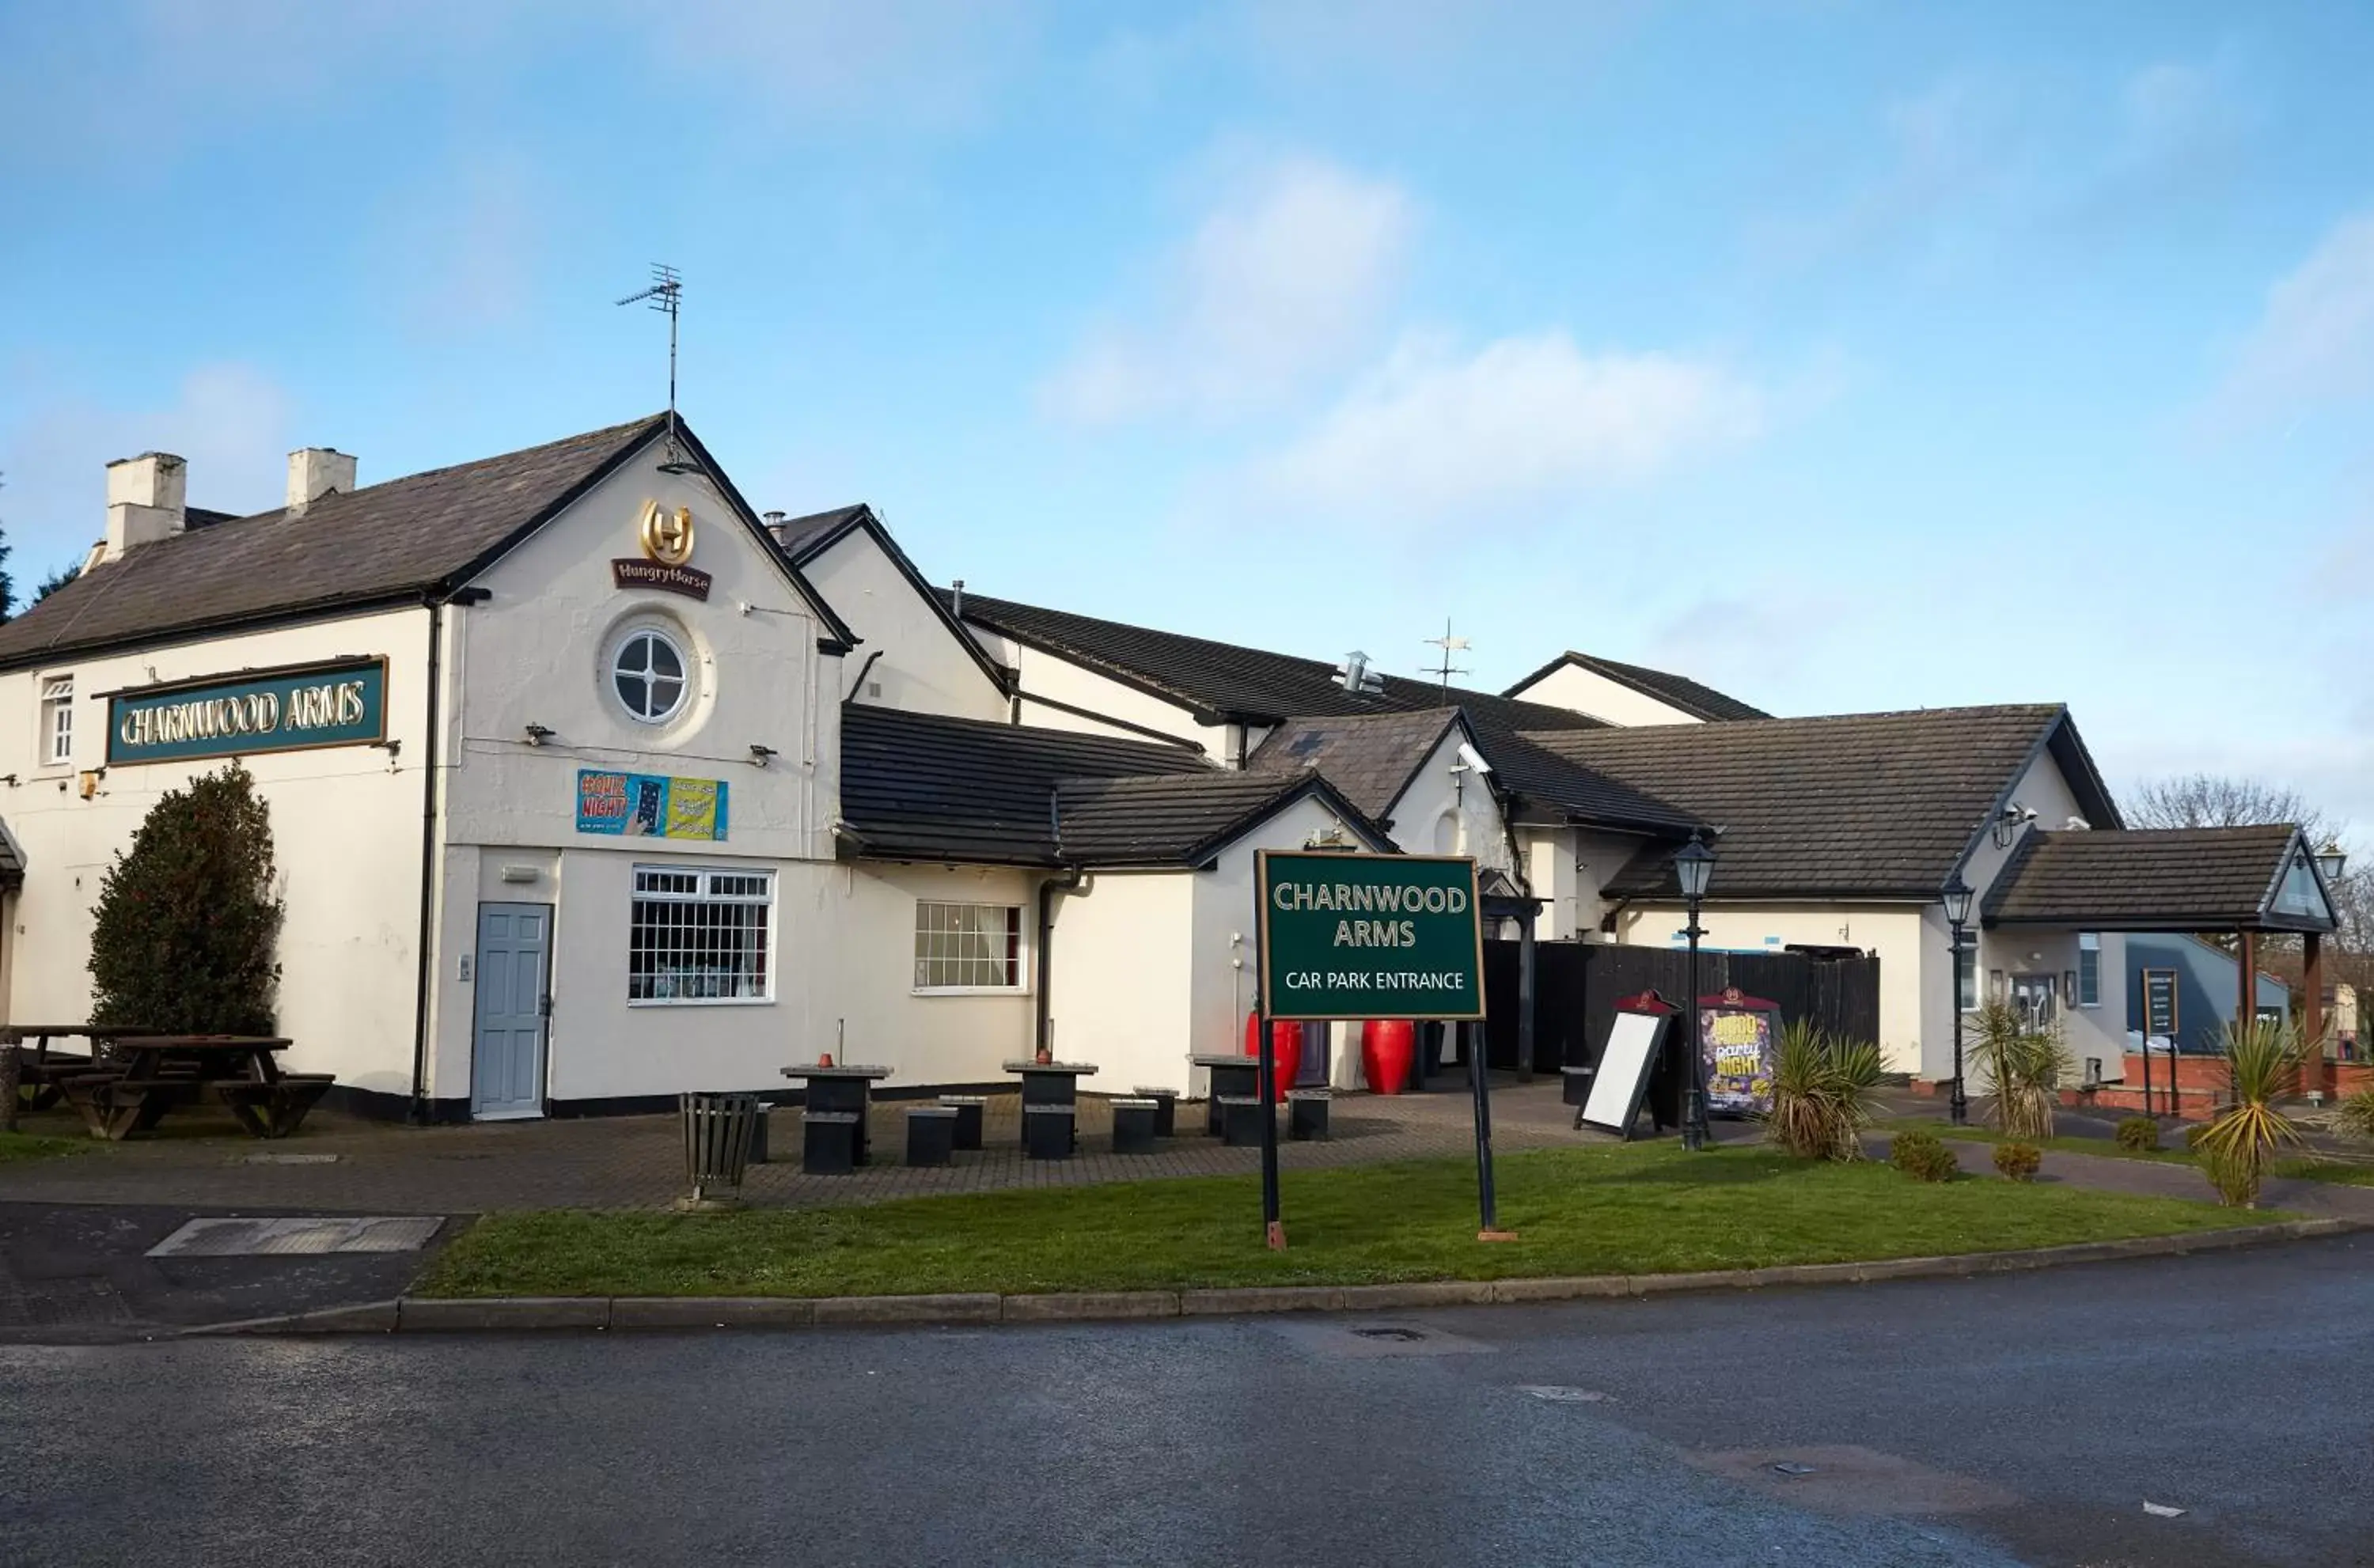 Property Building in Charnwood Arms